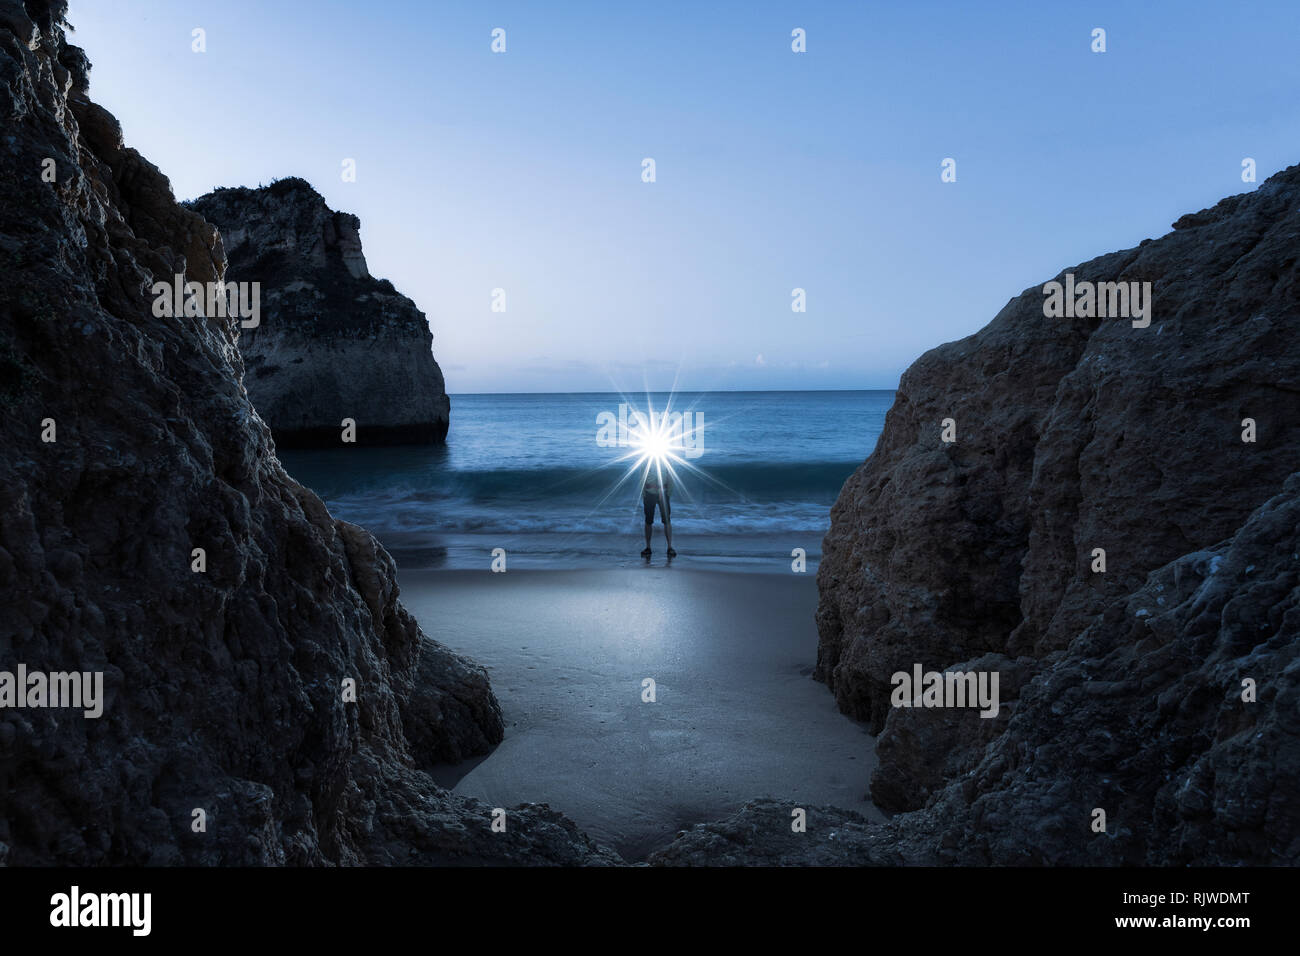 Man wearing illuminated headlamp, standing on beach by waters edge at sunset, Alvor, Algarve, Portugal, Europe Stock Photo